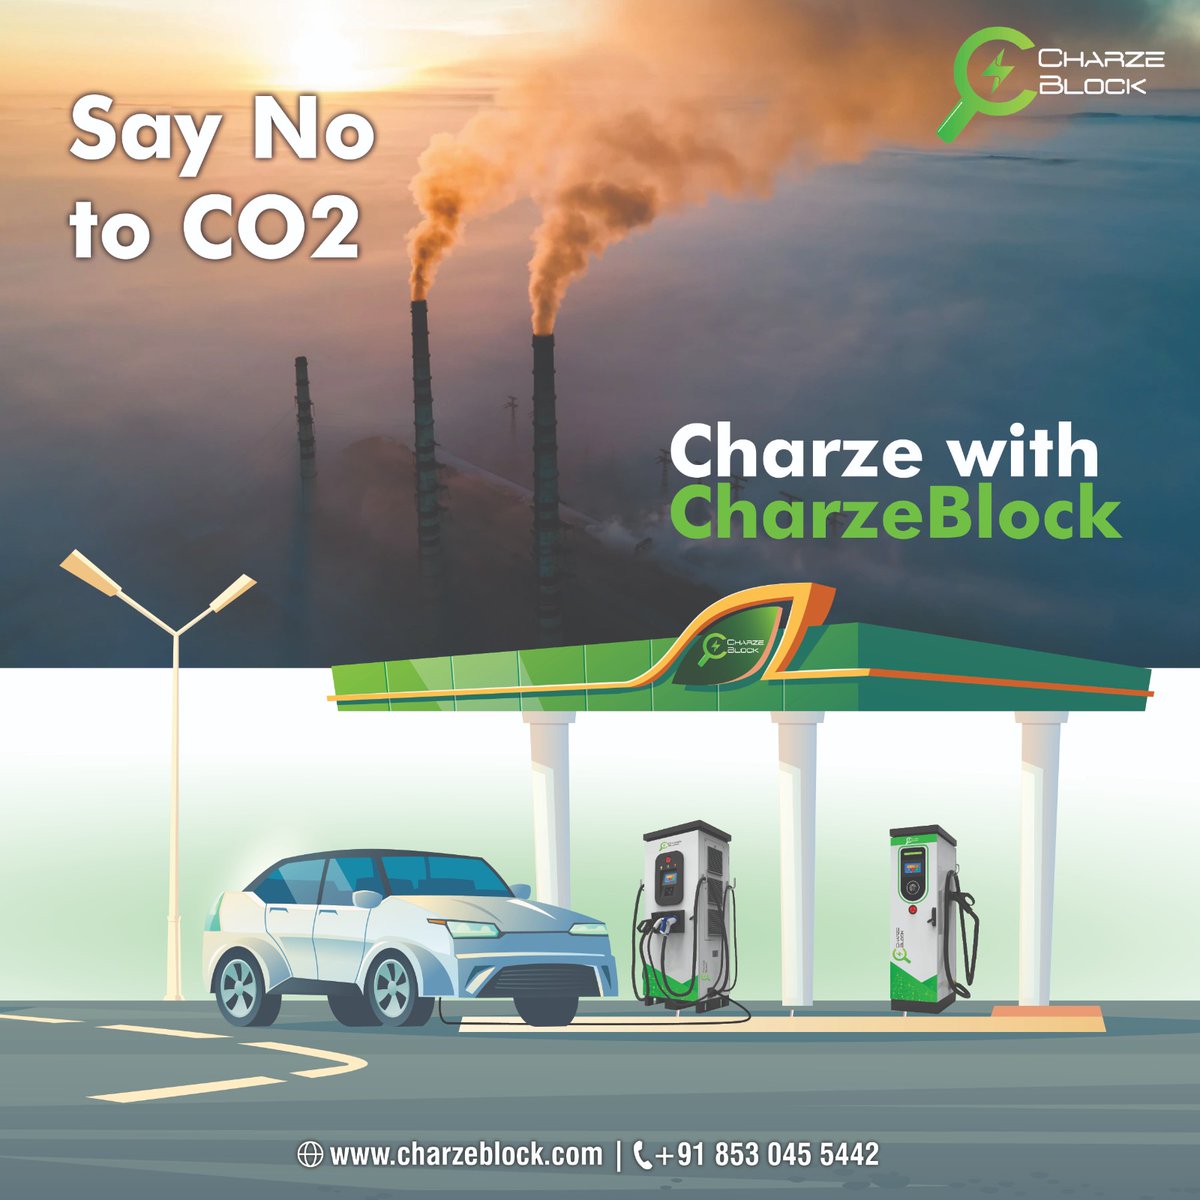 Say No to CO2: Embrace a Cleaner Future with CharzeBlock.
#cleanfuture #fastchargers #evcharging #SustainableTransportation #SmartCharging #EVChargingSolutions #ElectricRevolution #sustainablemobility #GreenTransportation #DrivingChange #electricmobility #goingelectric